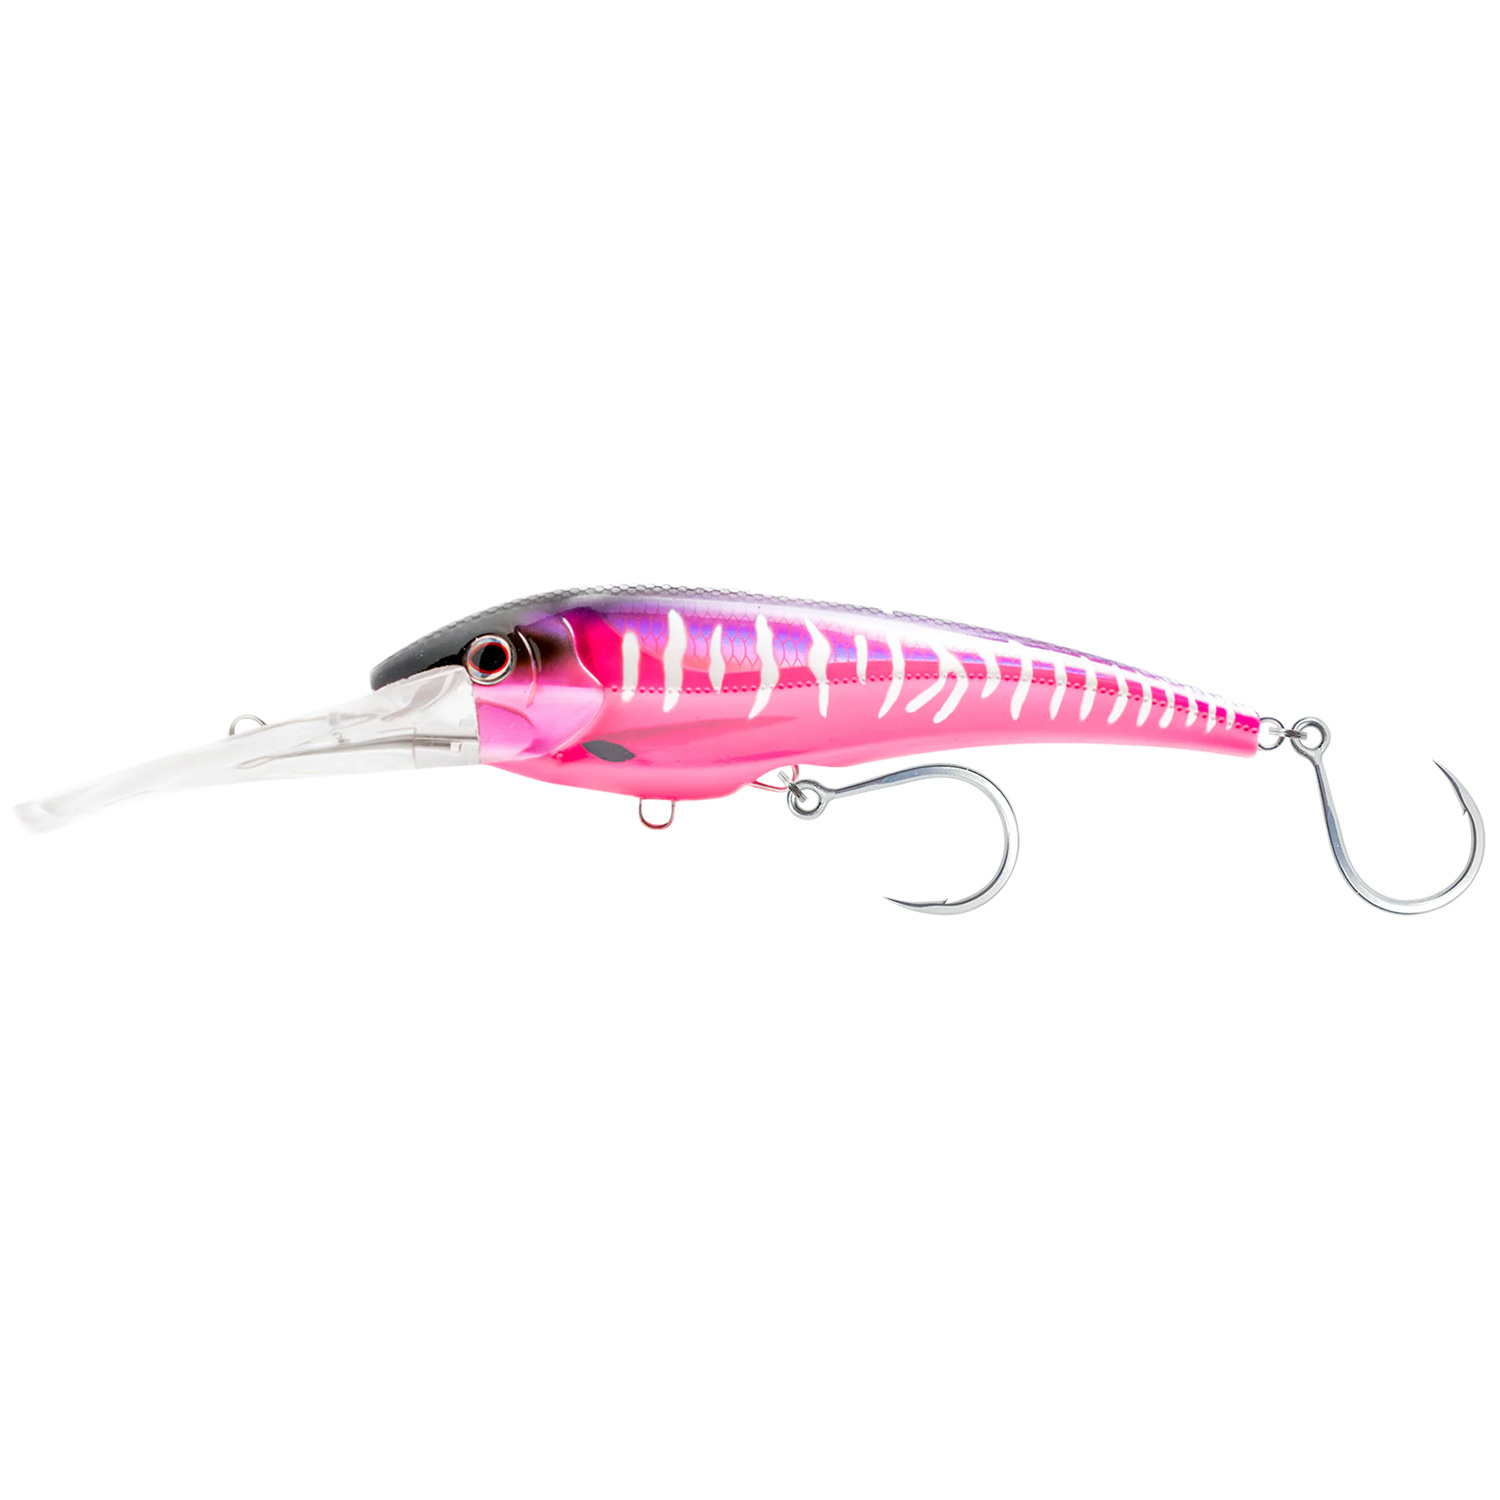 NOMAD DESIGN 8 DTX Minnow Sinking Trolling Lure, 5 4/5 Ounce